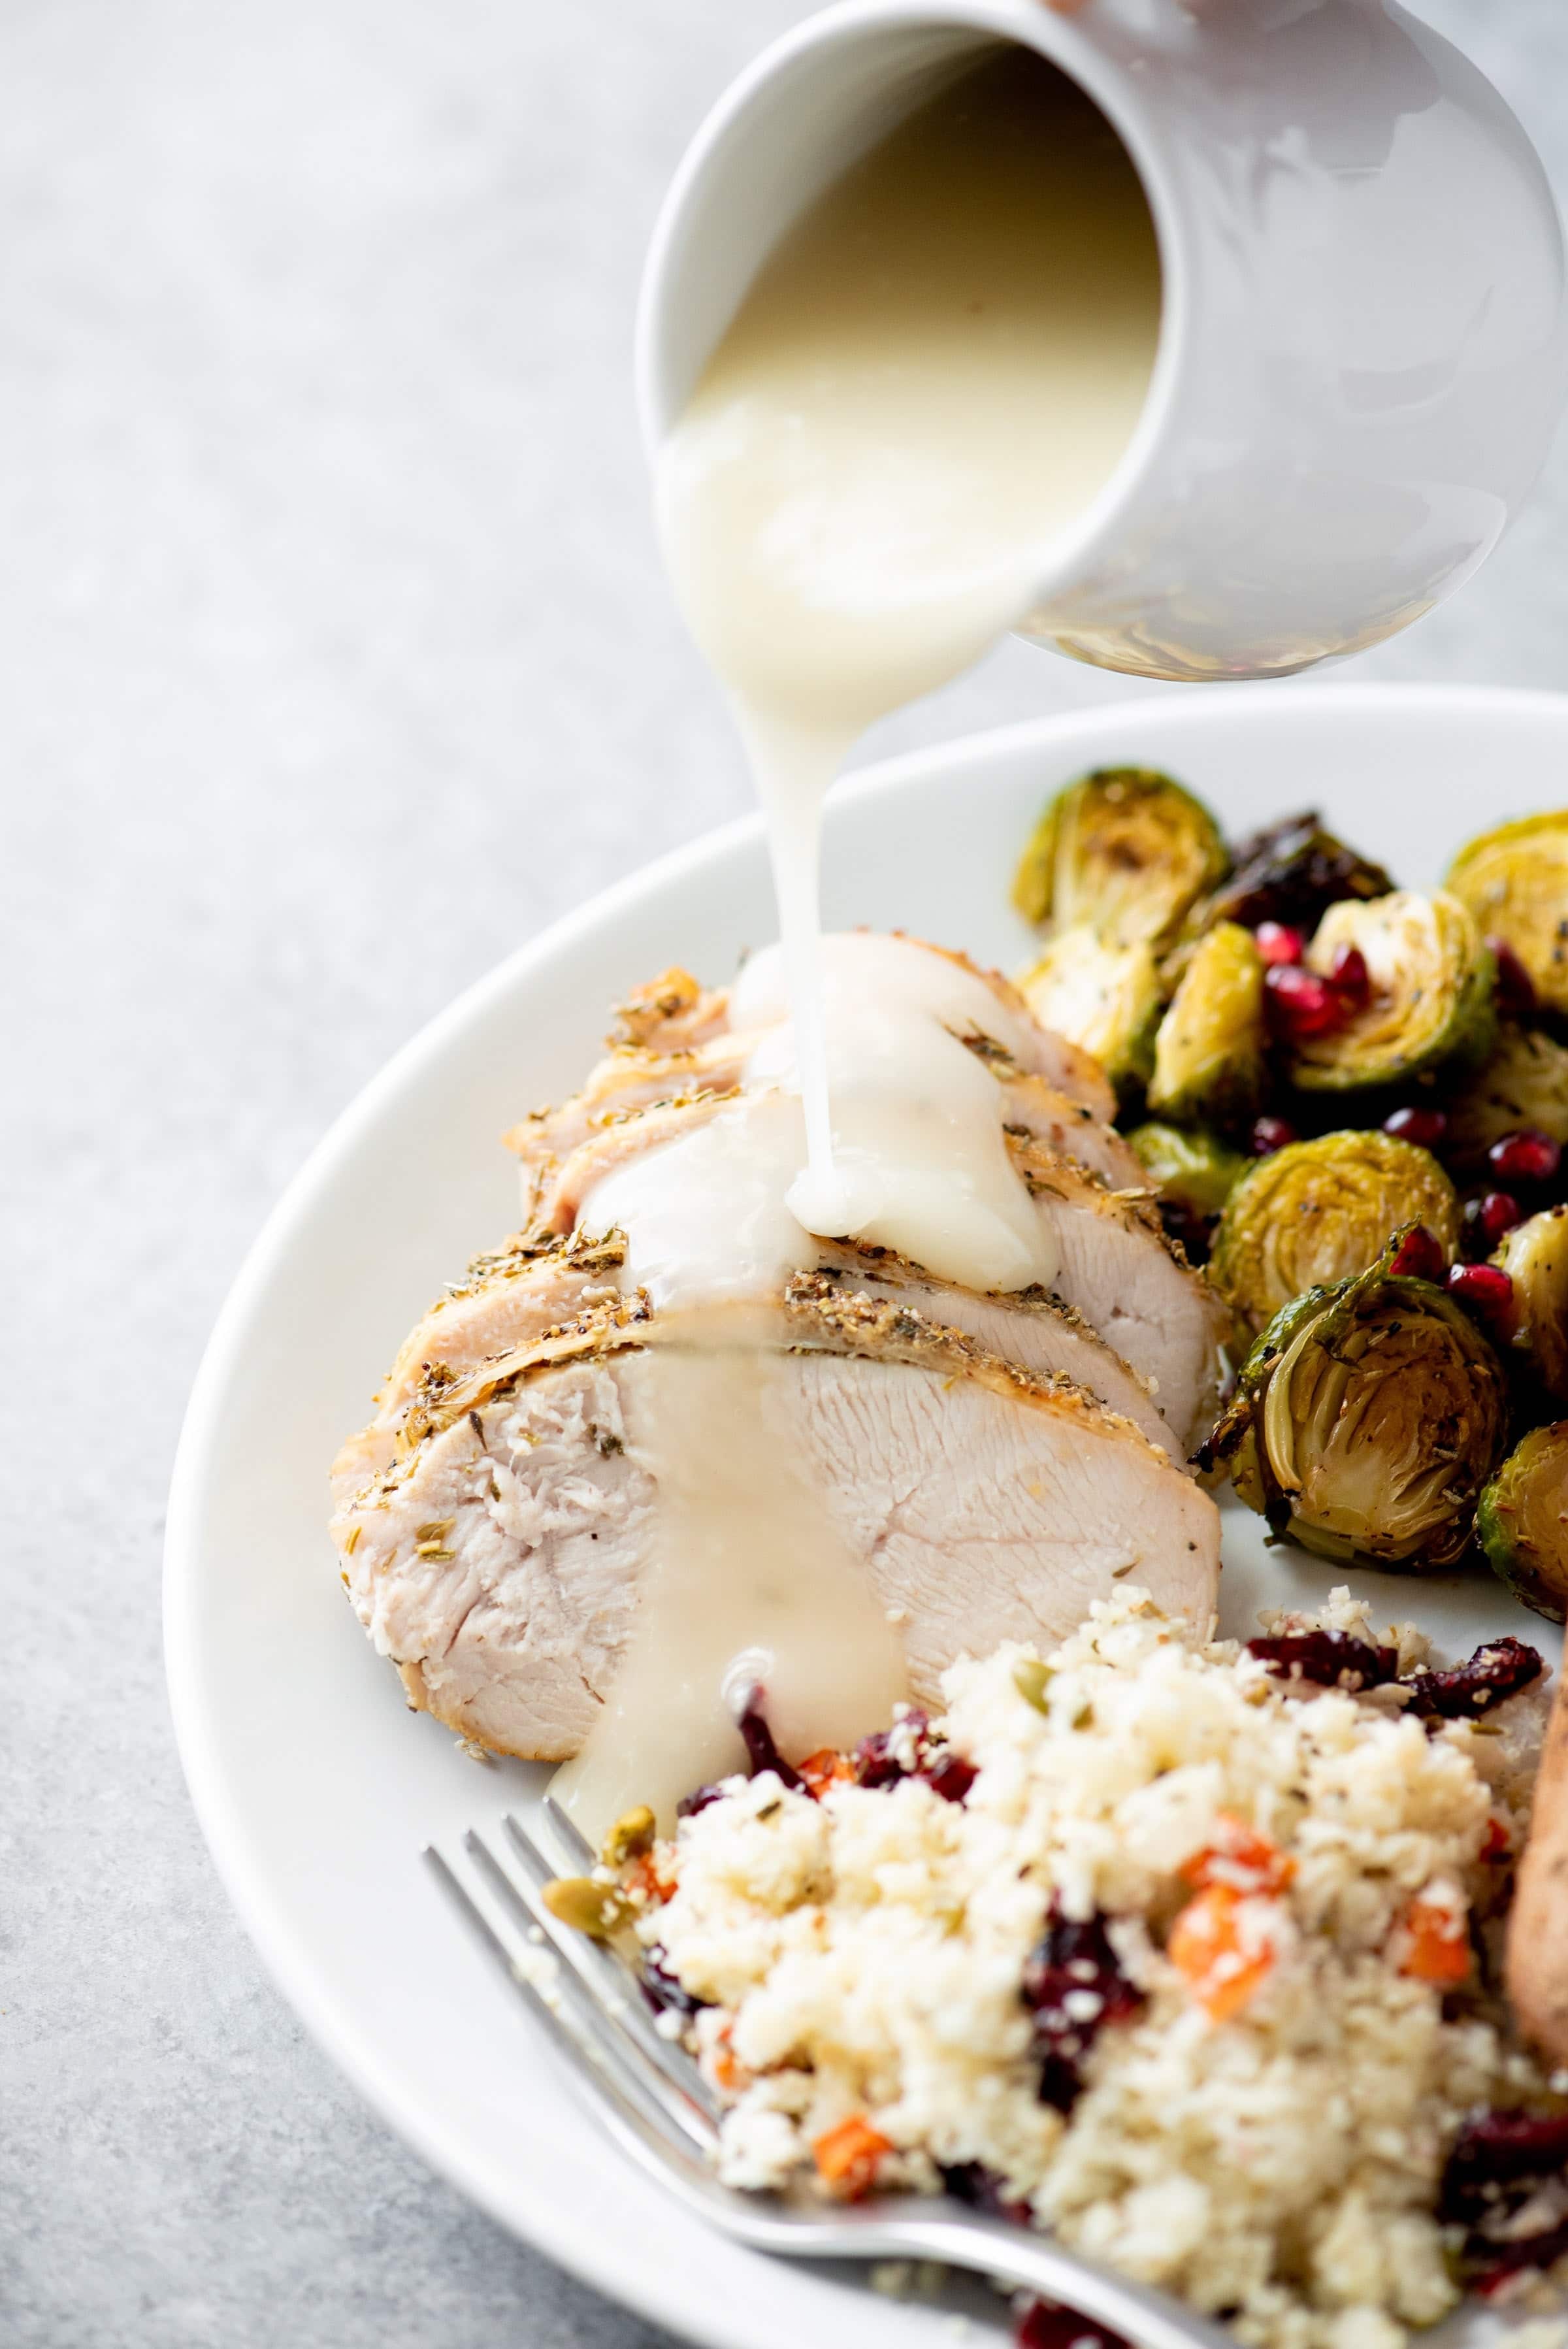 Gravy being poured over slices of turkey breast on a white plate. The plate also contains a cauli rice pilaf and roasted Brussels sprouts.